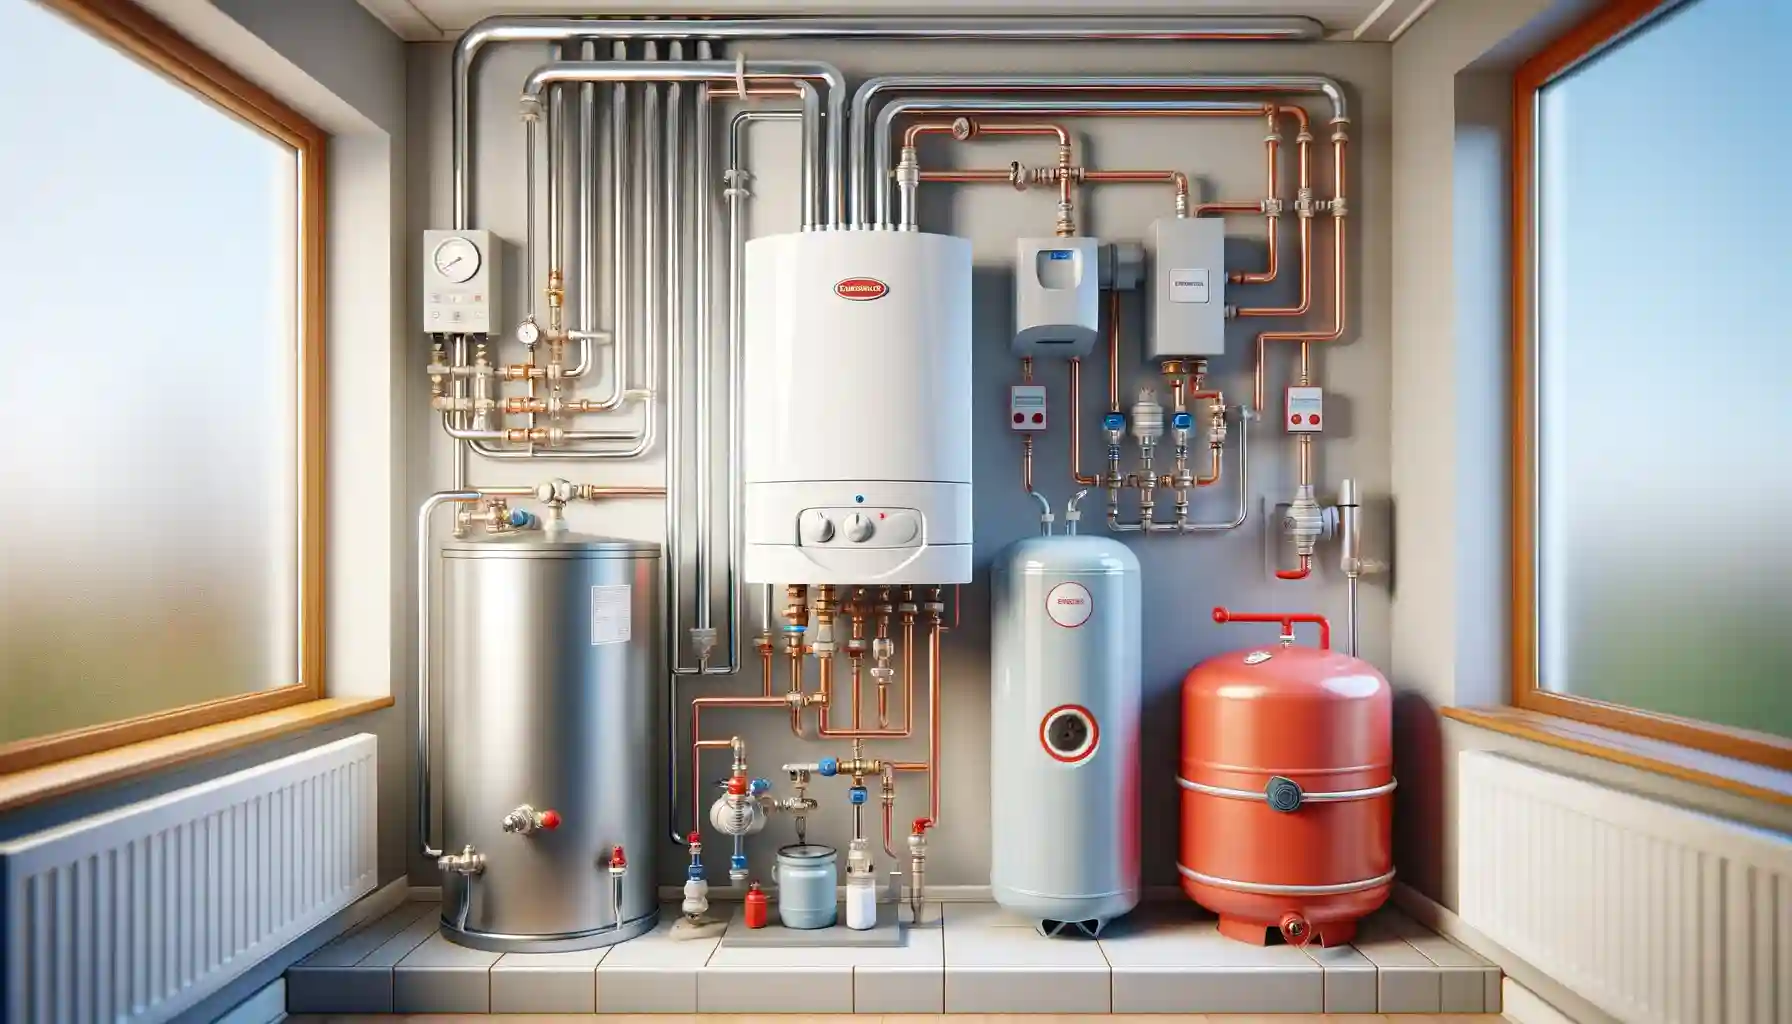 llustration of a home heating system, featuring a central system boiler, a hot water cylinder, and an expansion vessel, set in a utility room environment.